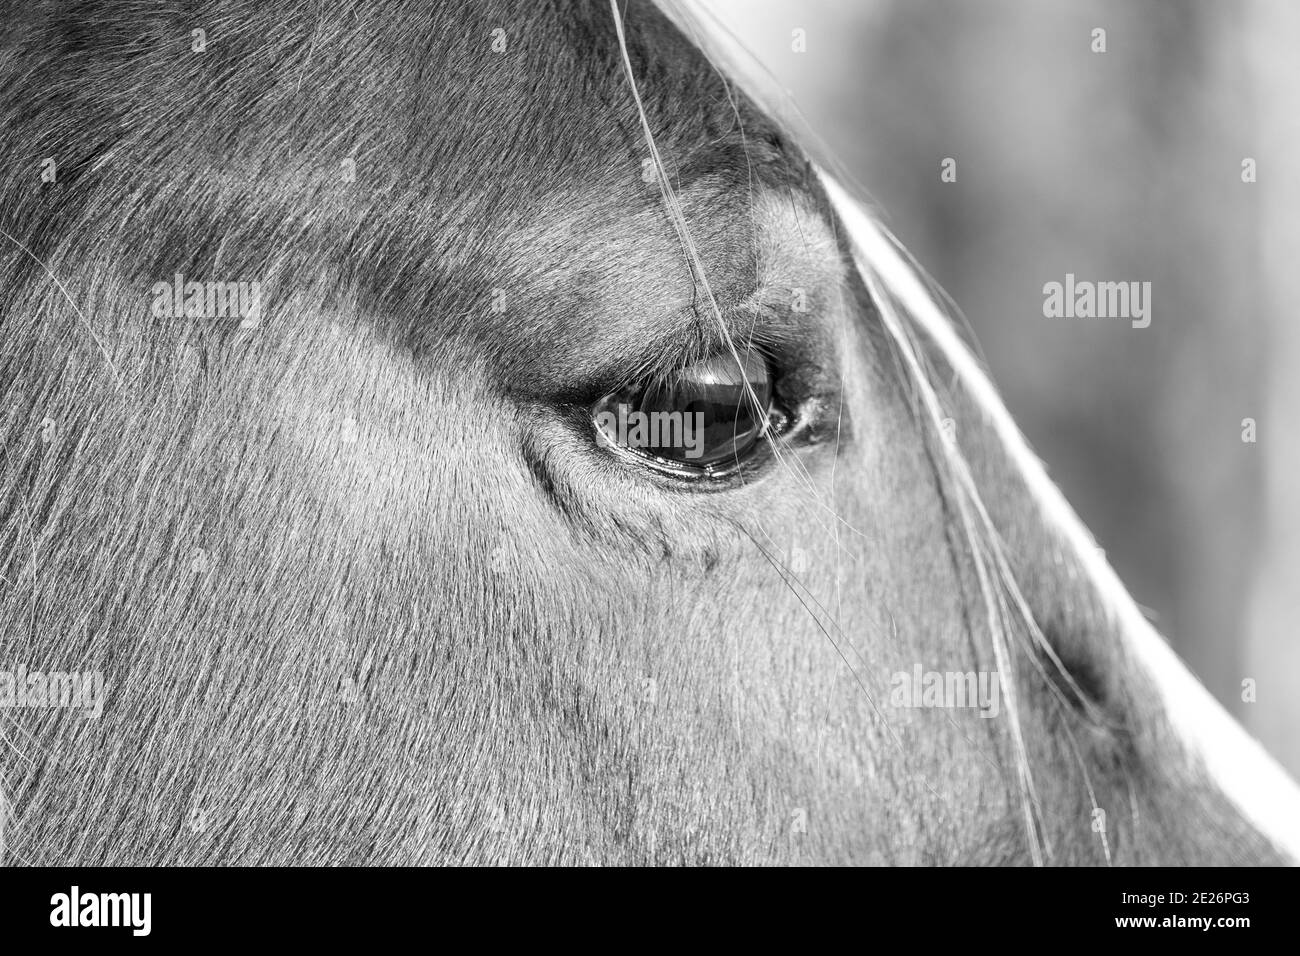 A Horse Portrait Focusing on a Single Brown Eye. High quality photo Stock Photo